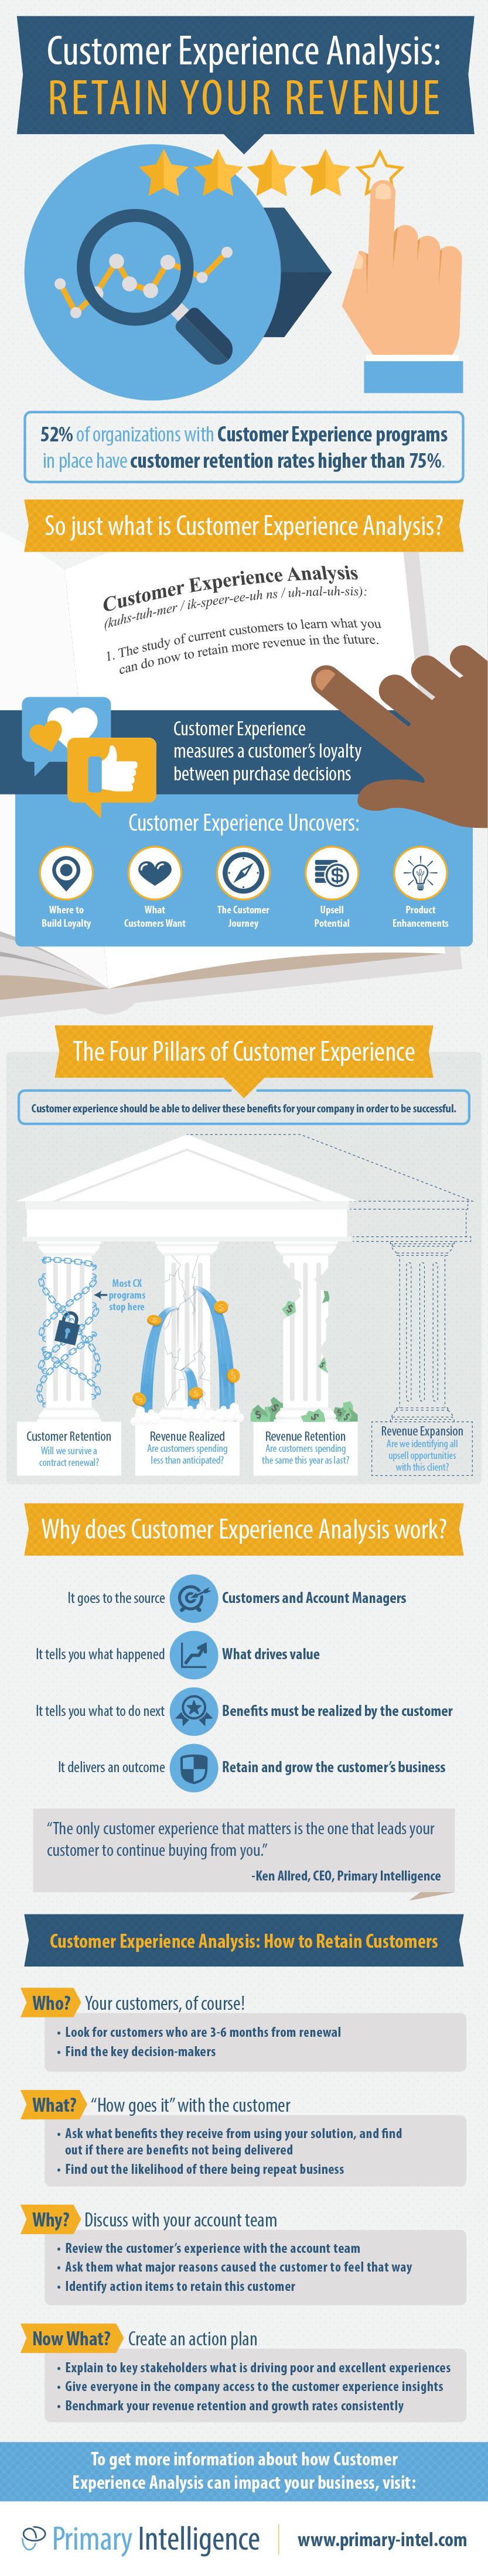 Customer experience analysis - infographic by Primary Intelligence